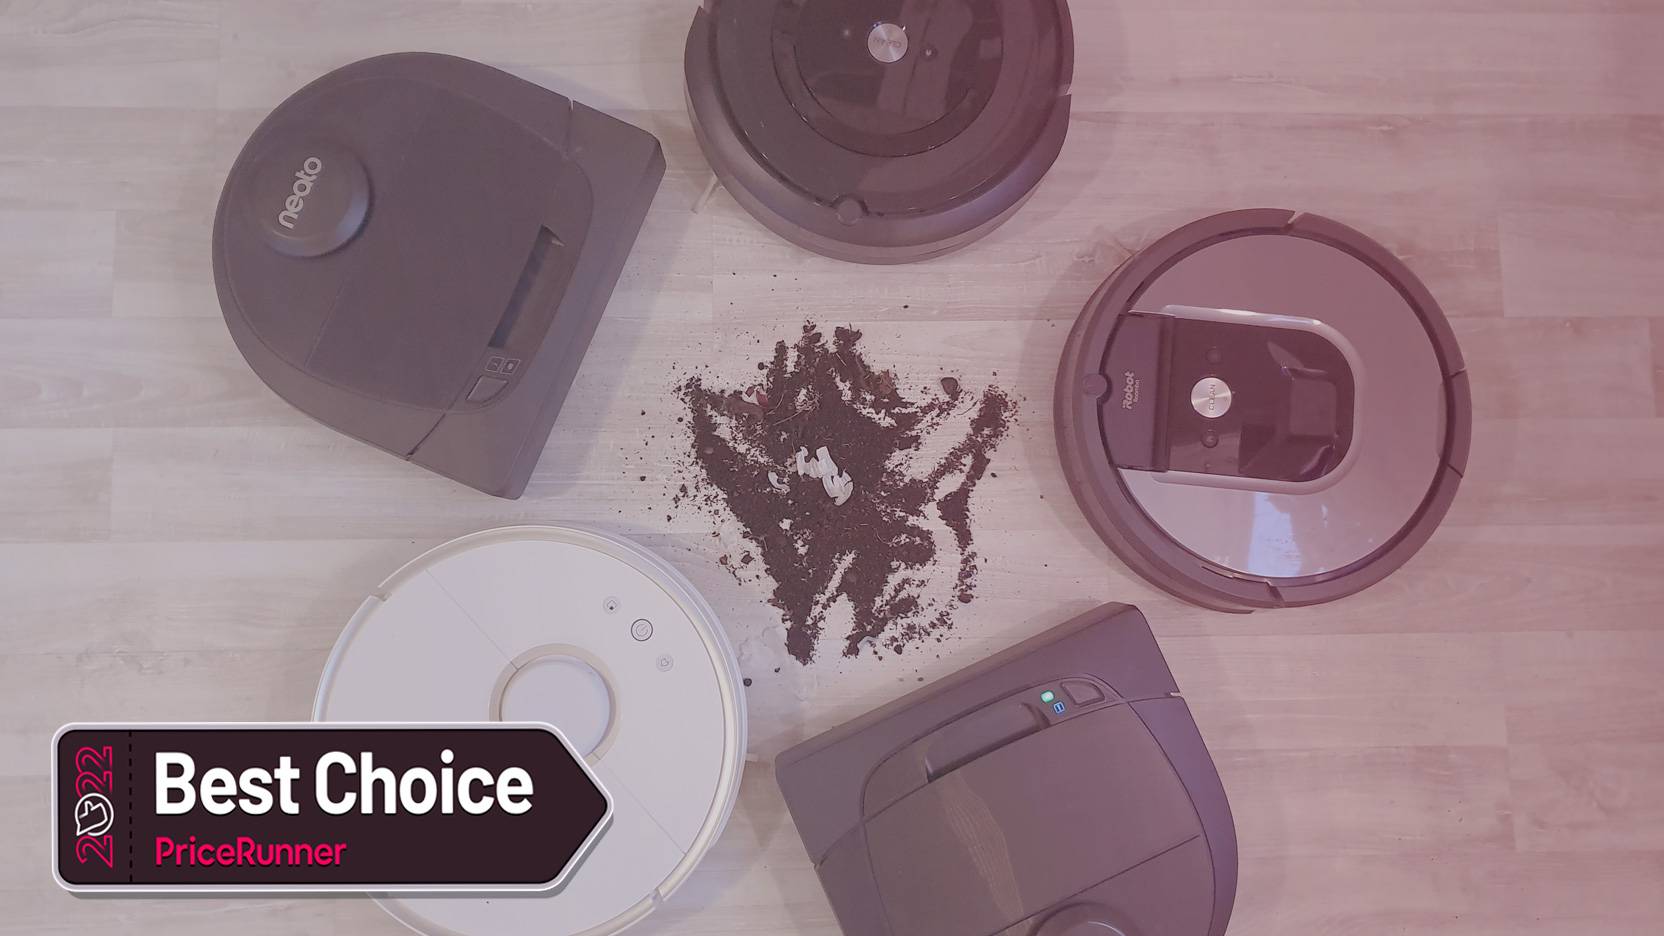 iRobot brings Siri support to its robot vacuums, updates Roomba j7 with new  features